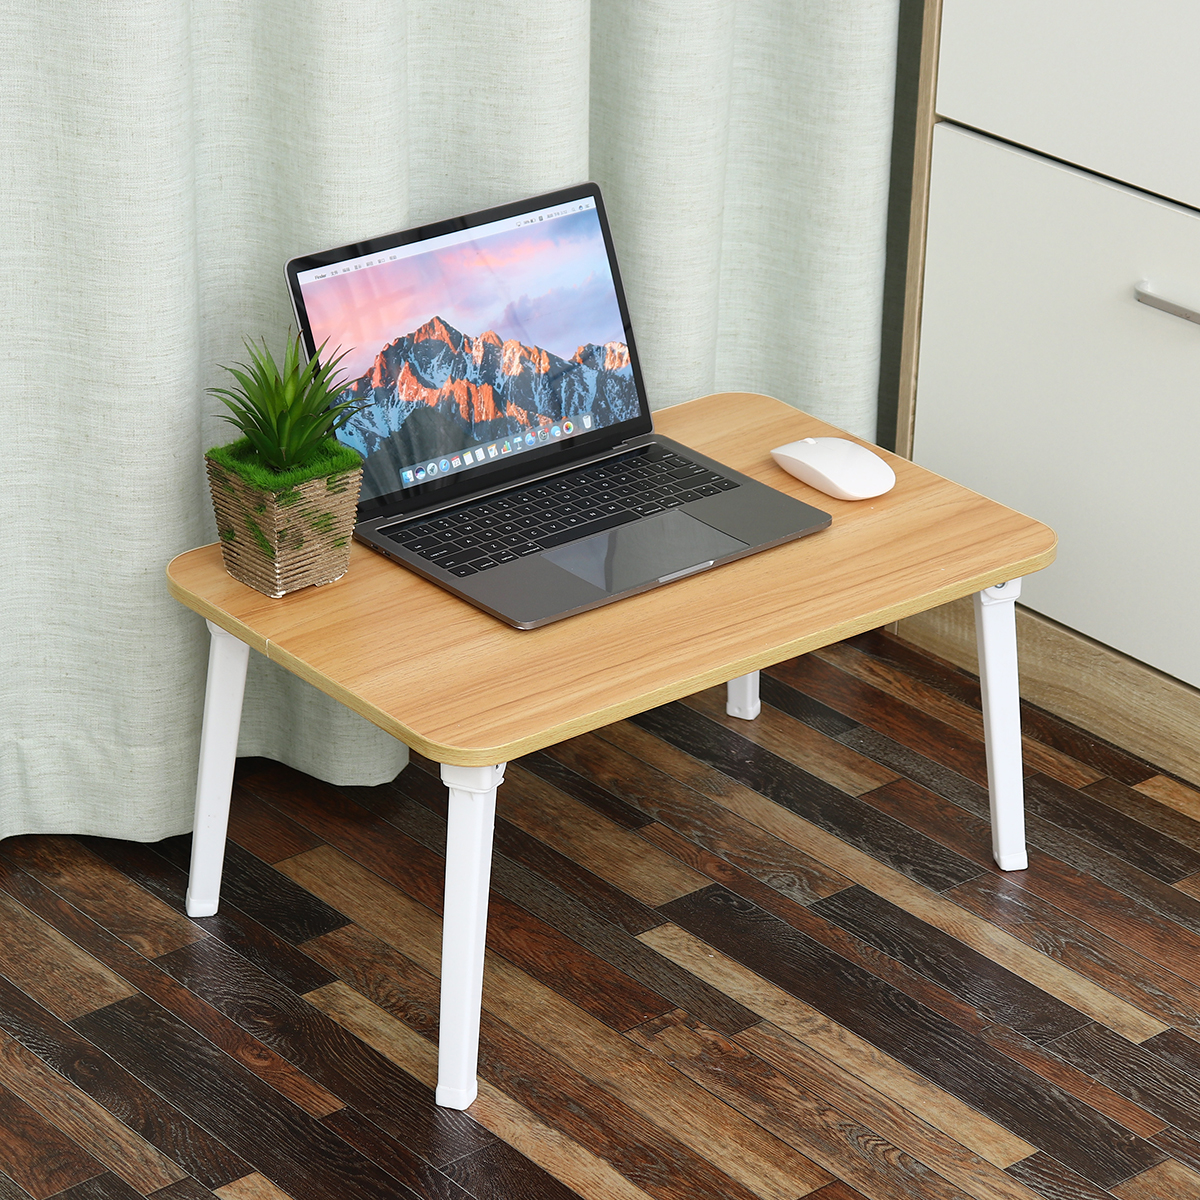 Folding-Small-Table-Computer-Desk-60x40-Made-of-Walnut-for-Home-Office-1779889-5